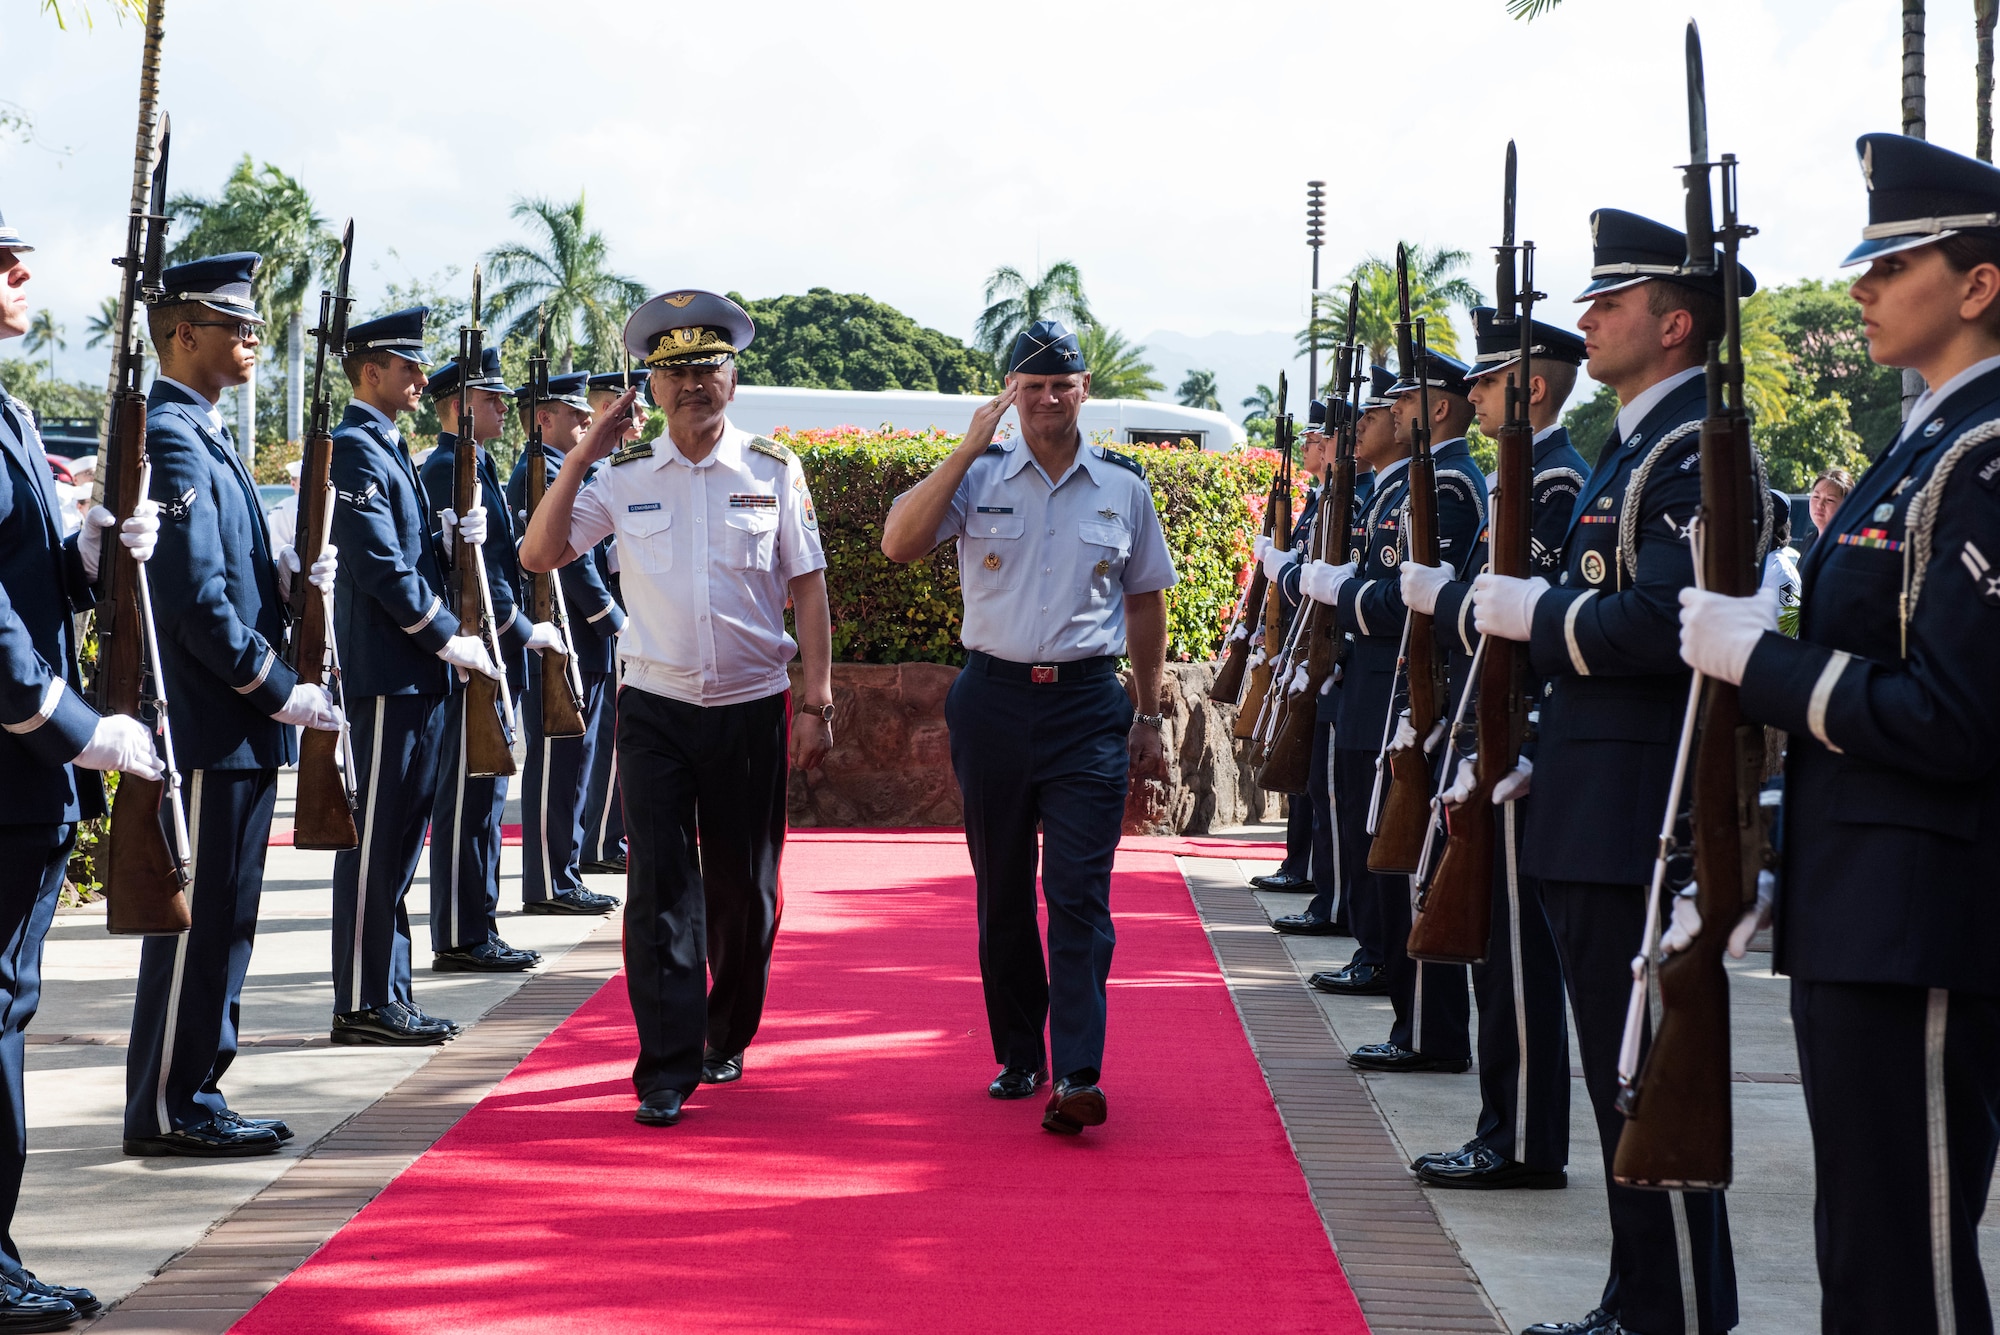 Commander of the Mongolian Air Force Command Brig. Gen. Enkhbayar Ochir and Pacific Air Forces Deputy Commander Maj. Gen. Russ Mack salute as they pass through the honor cordon at Headquarters PACAF, Joint Base Pearl Harbor-Hickam, Hawaii, March 26, 2019.